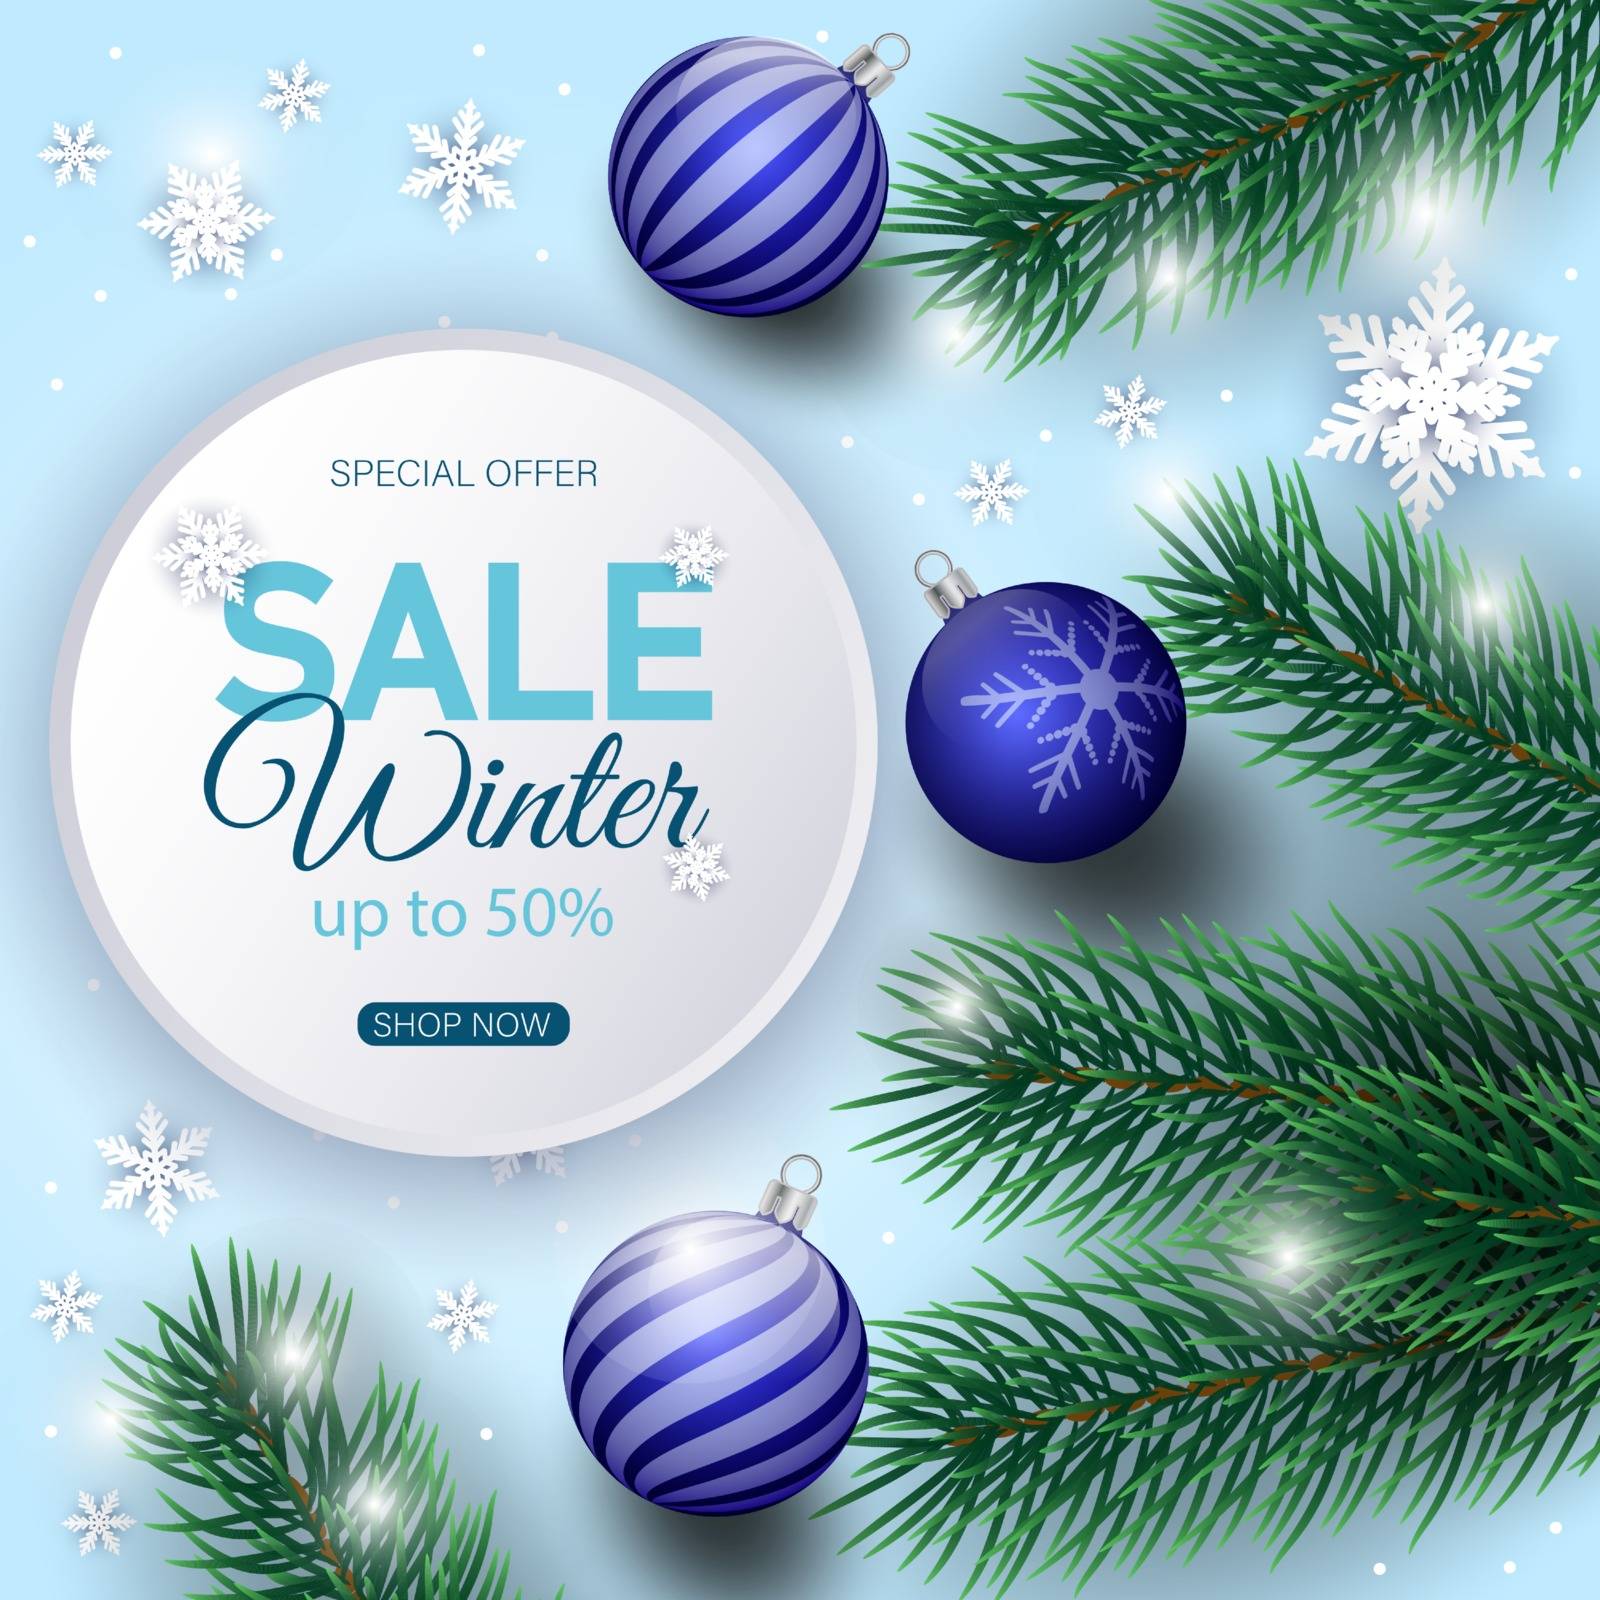 Winter sale banner decorated with Christmas tree branches and snow by Helenshi